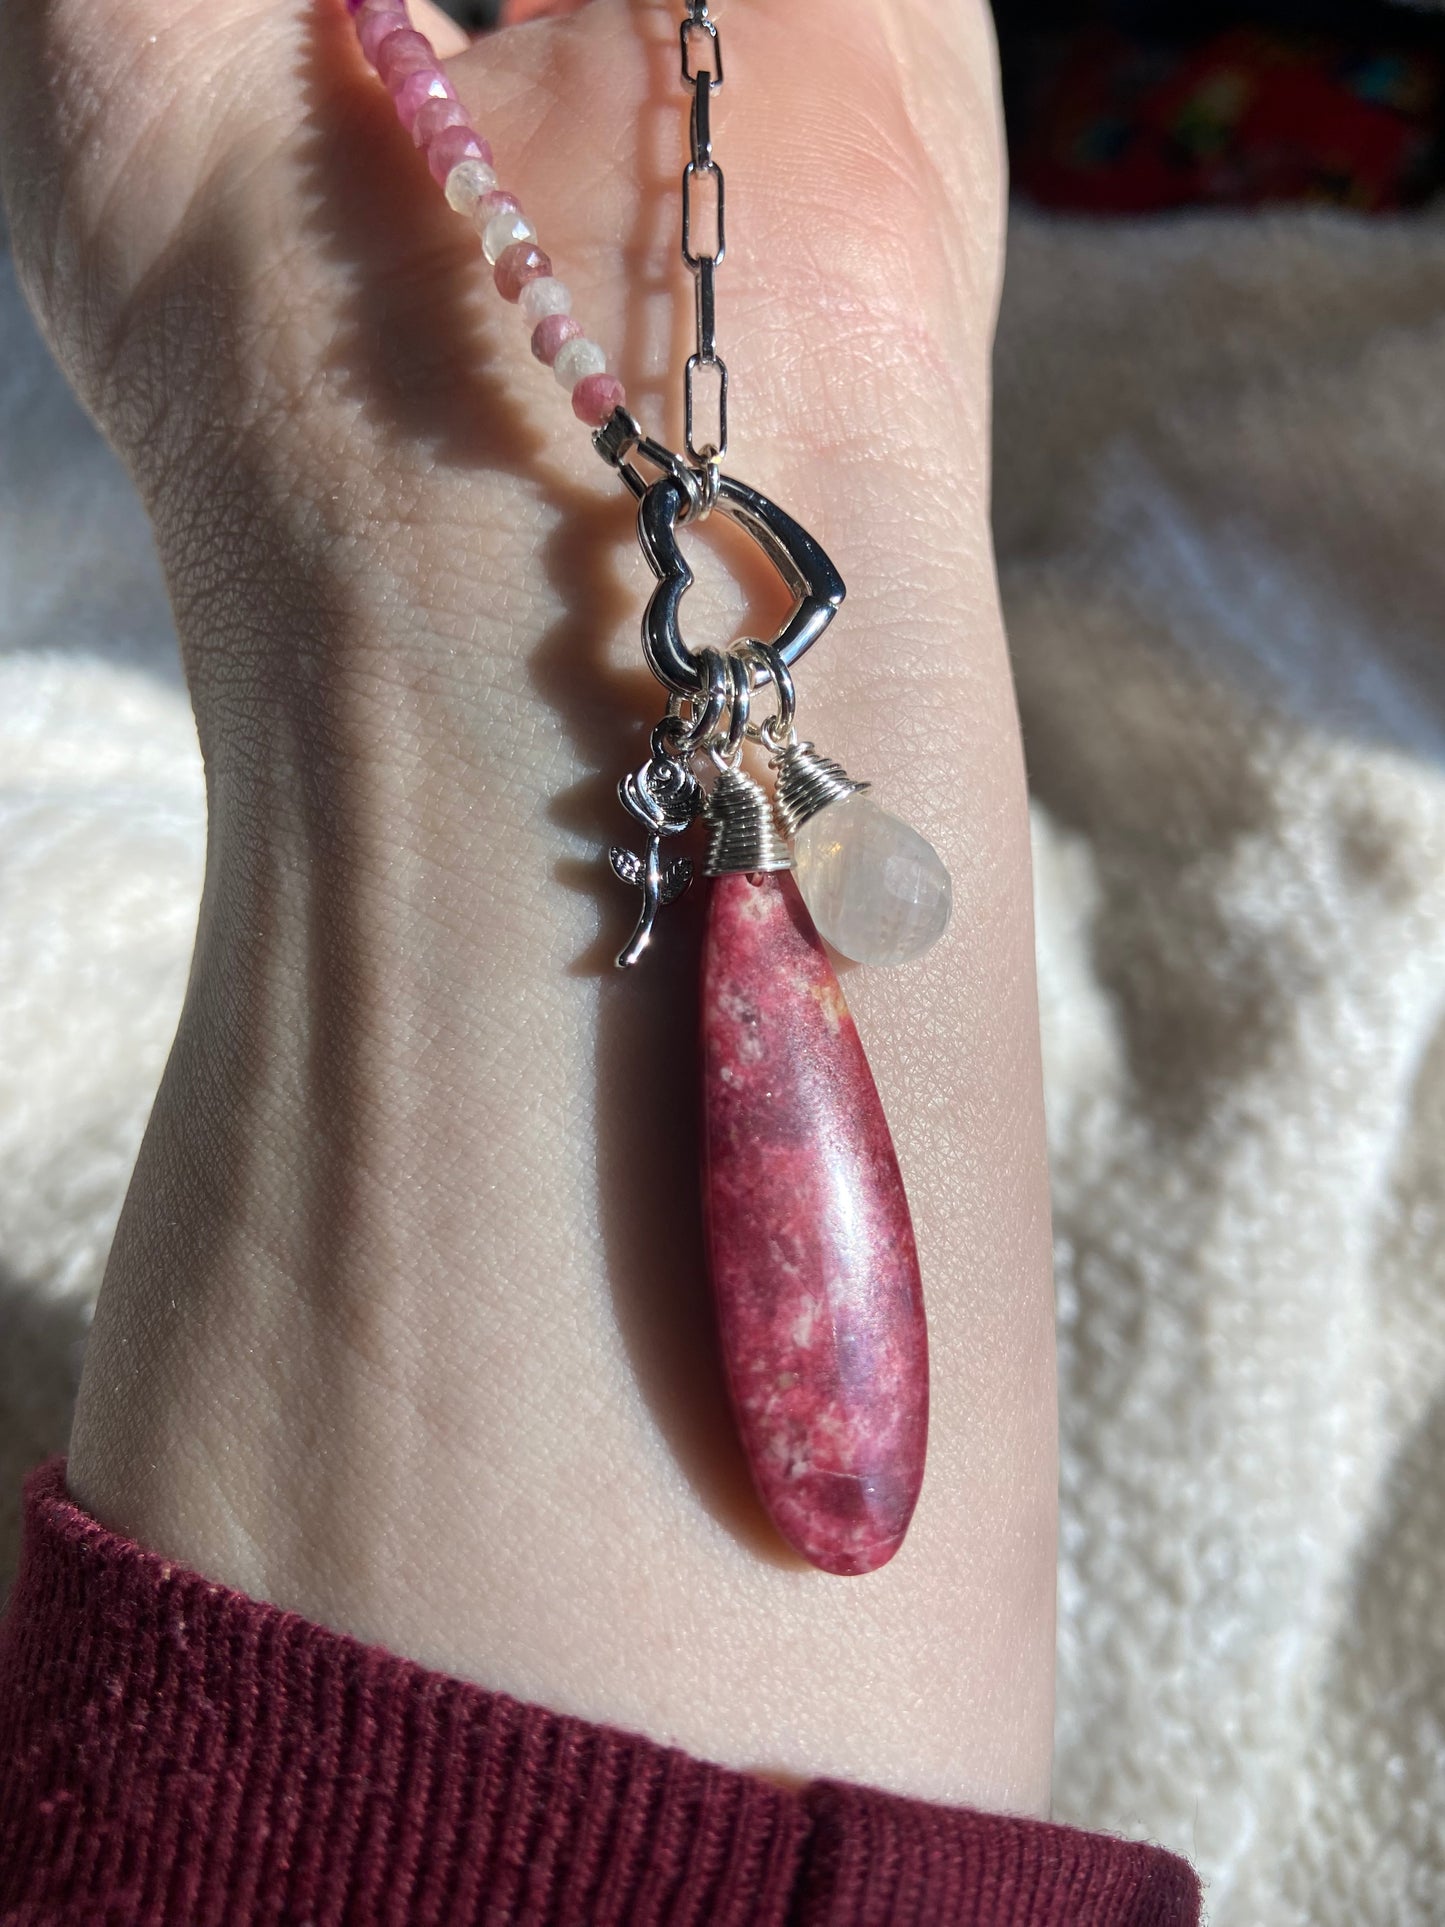 Thulite Charm necklace